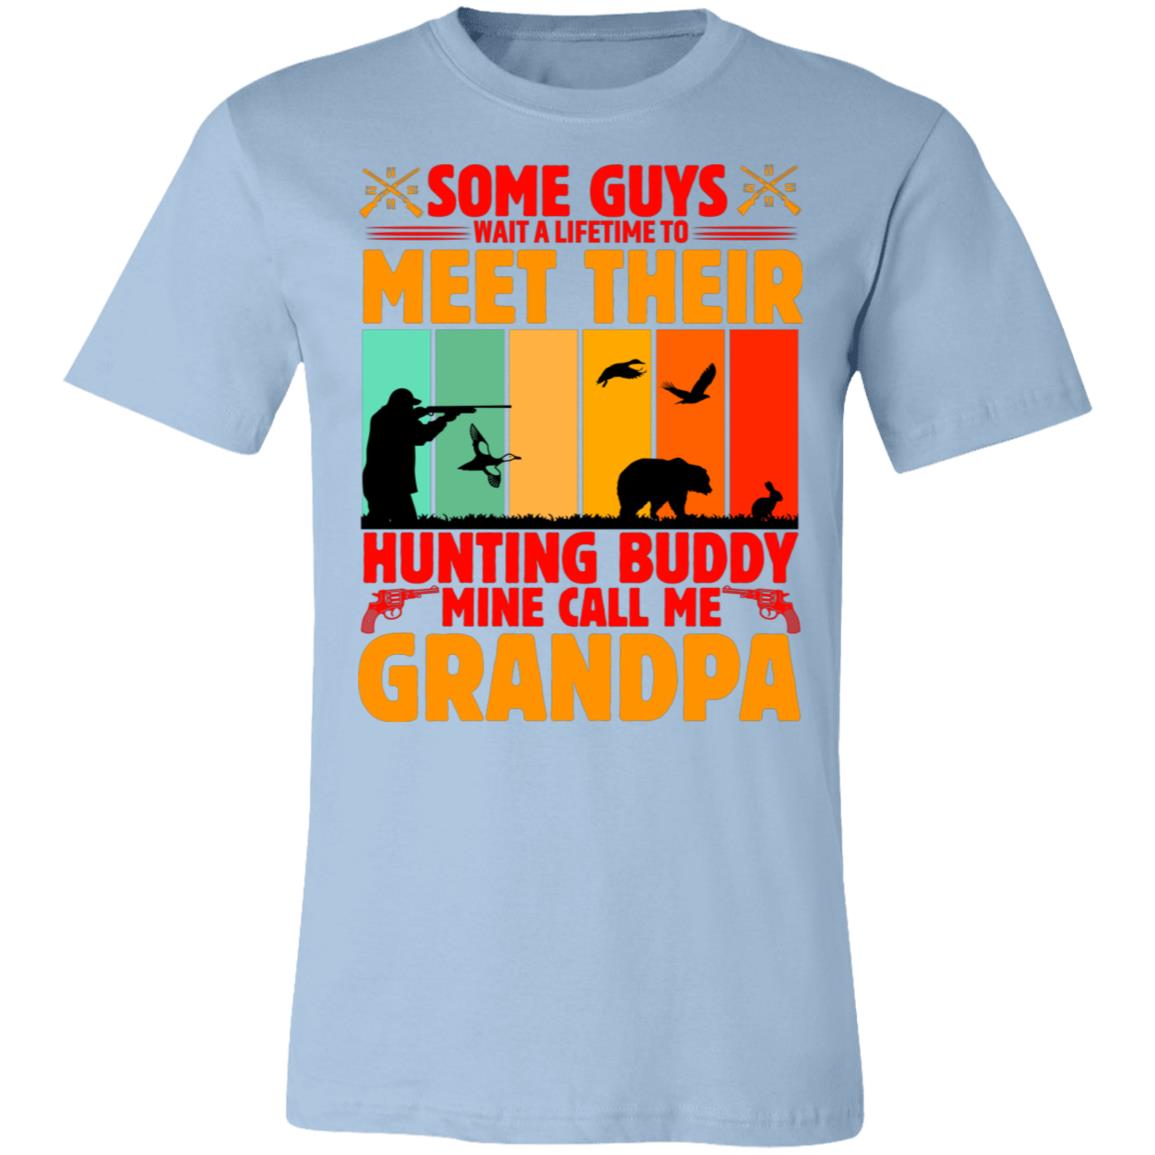 Grandpa is Hunting Buddy Hunter Gift T-Shirt-Express Your Love Gifts